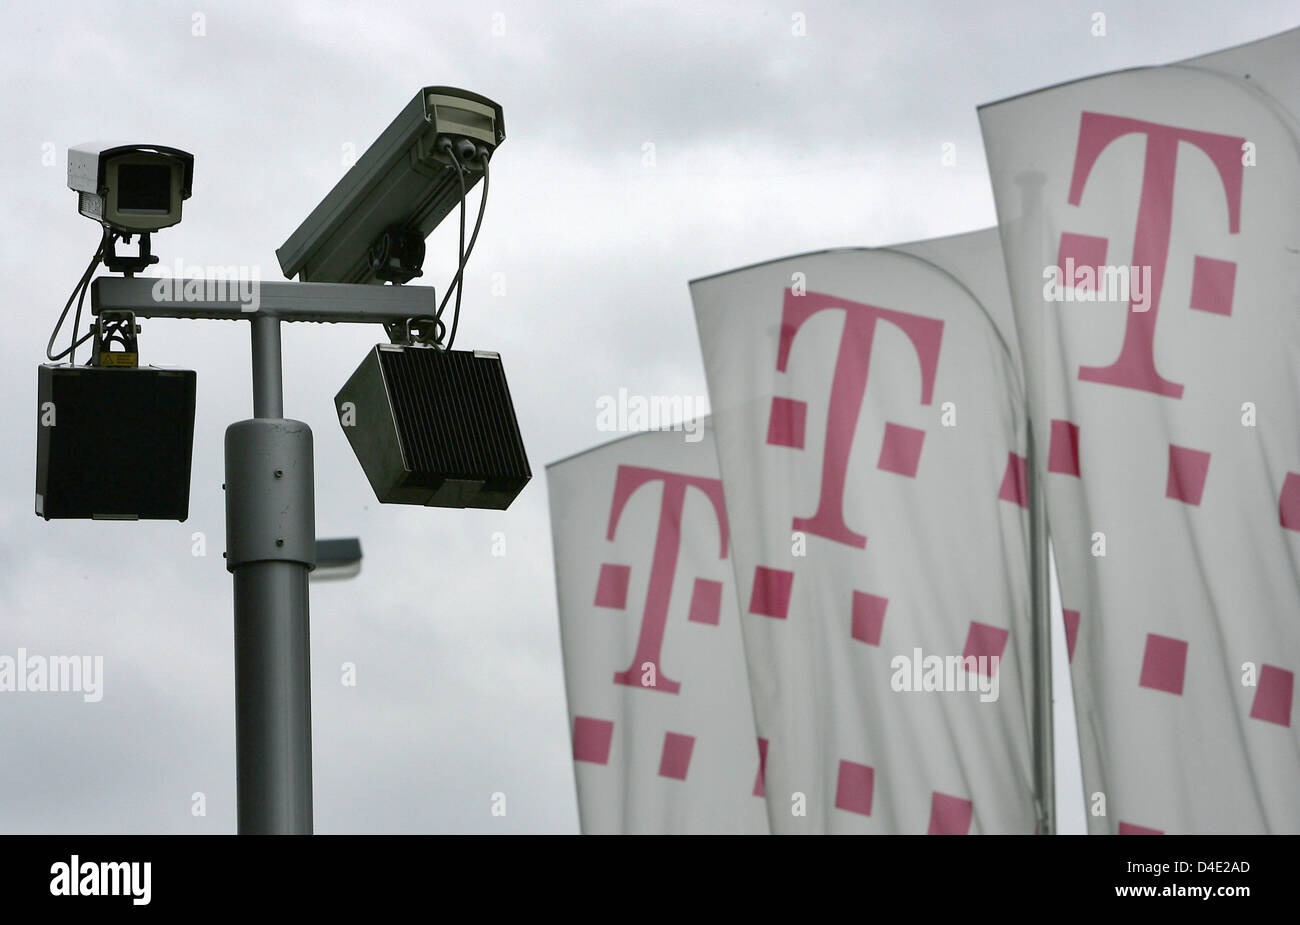 CCTV cameras seen next to the logo of Deutsche Telekom at the company headquarters in Bonn, Germany, 6 Ocotber 2008. Data protection continues to challenge the company, ever since the scandal of May 2008. Deutsche Telekom CEO Obermann, who had to admit that Telekom spied on journalists and members of the supervisory board, was not charged during the earlier scandal, when officials  Stock Photo